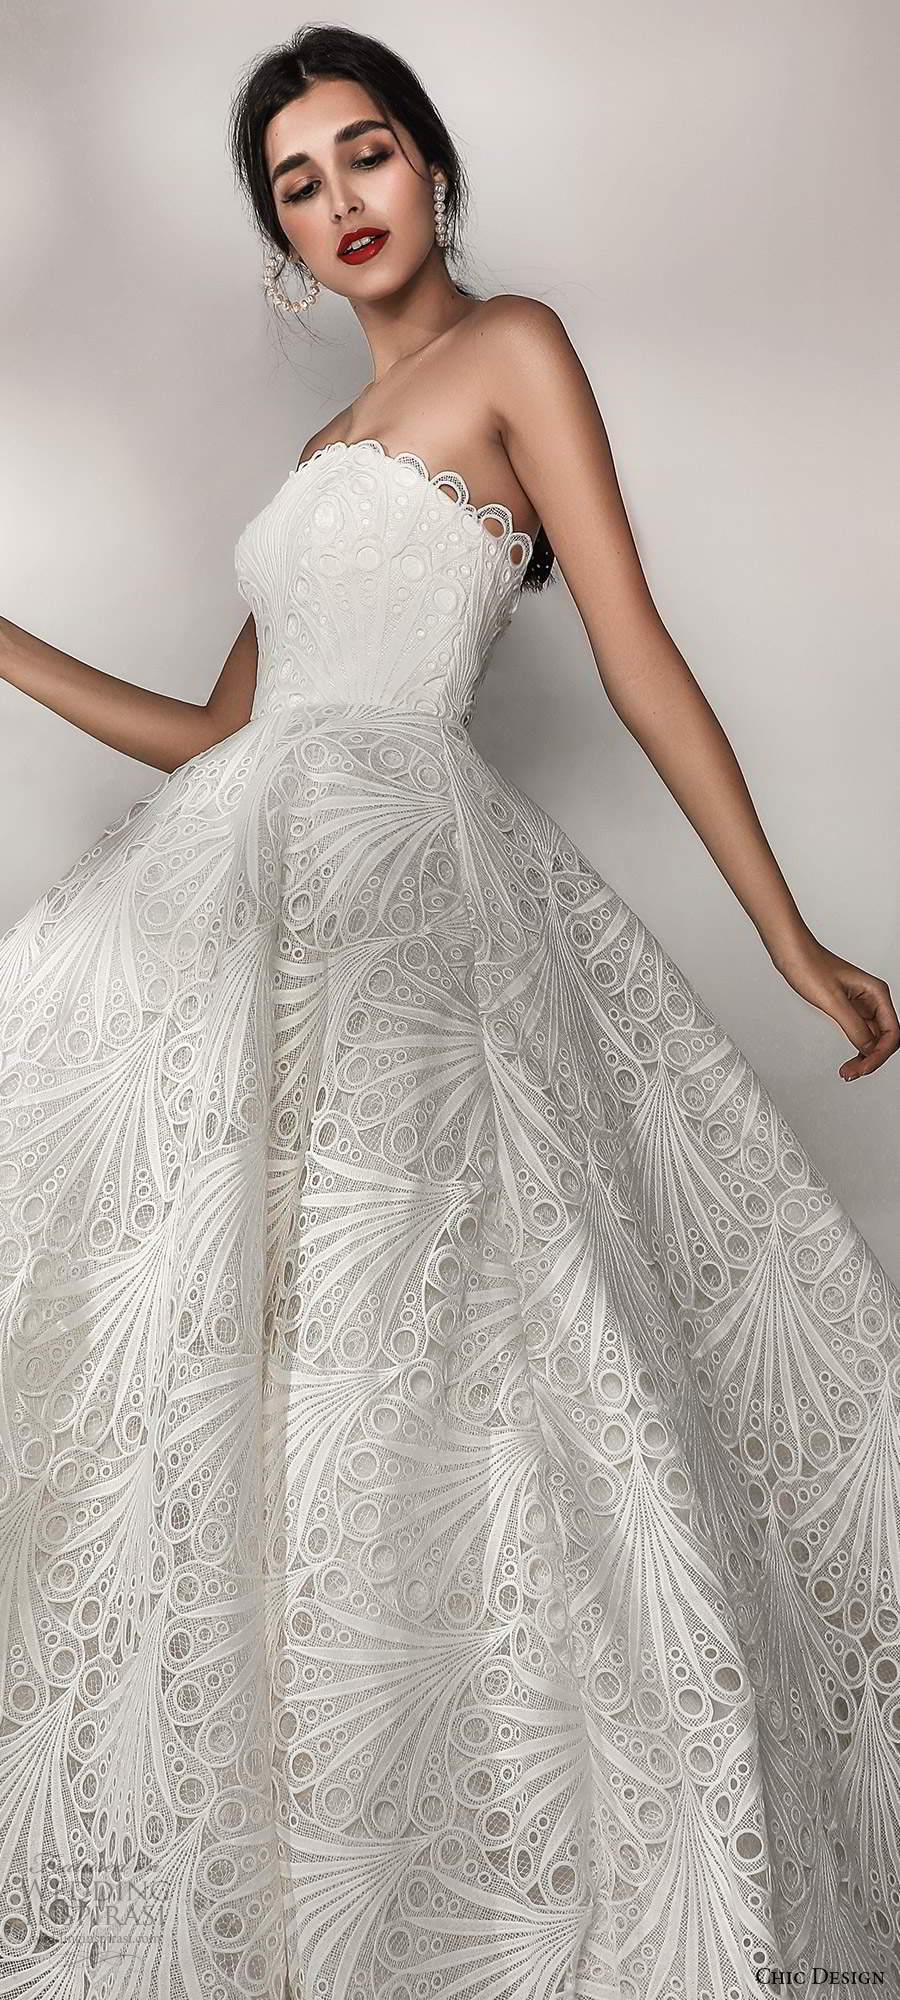 chic design 2020 bridal strapless straight across neckline embellished a line ball gown wedding dress chapel train pockets (3) lv